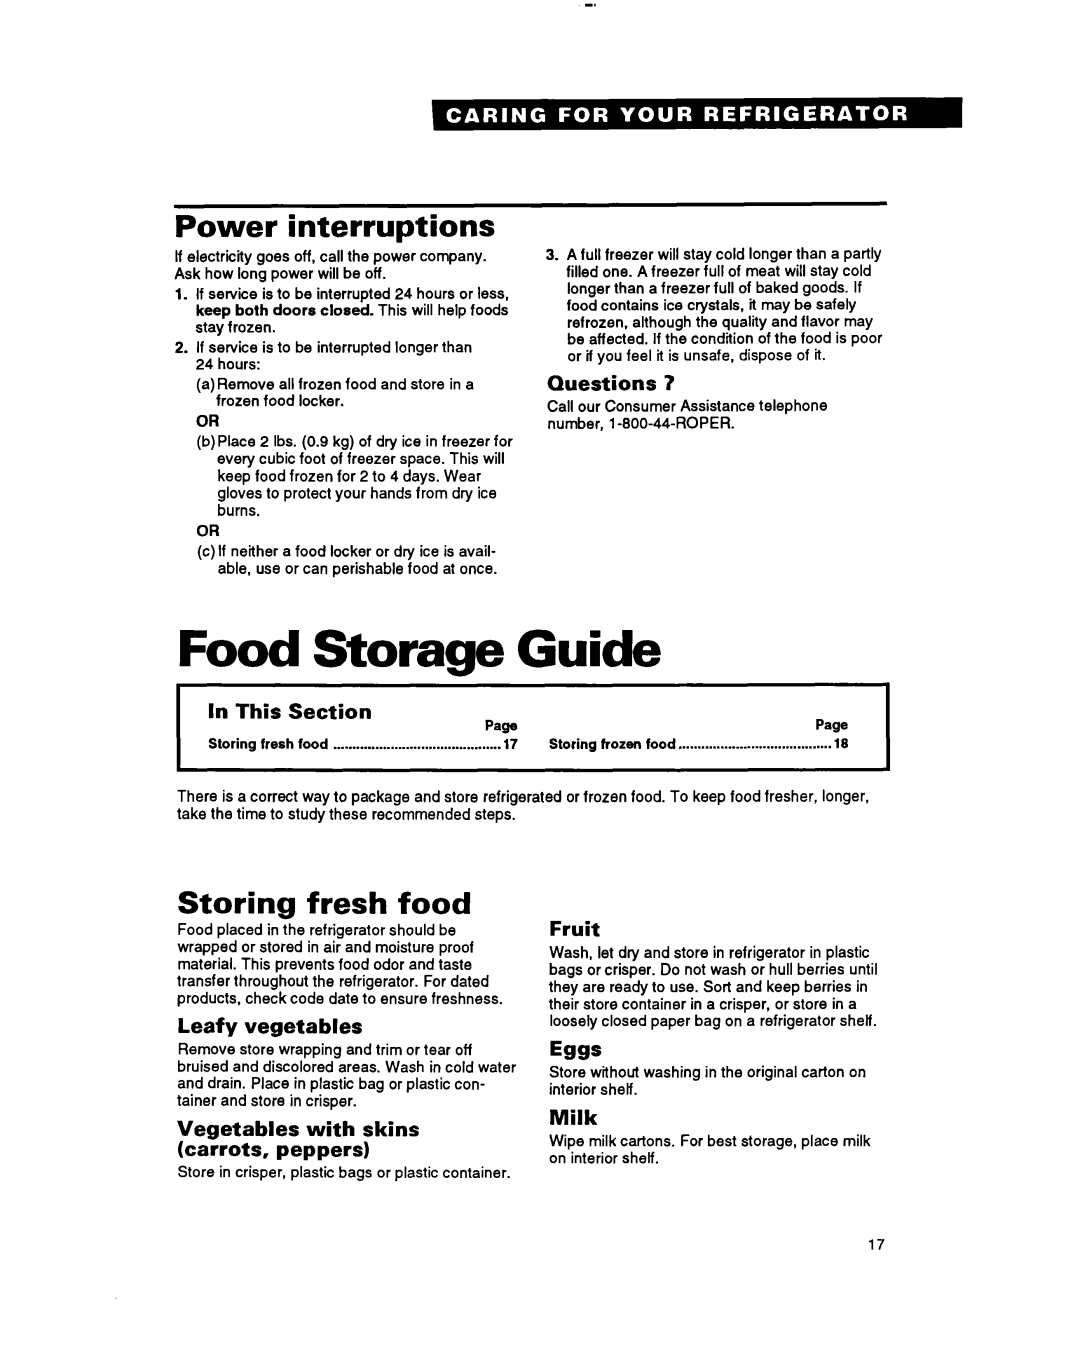 Whirlpool A RT18BM Food Storage Guide, Power interruptions, Storing fresh food, Questions, In This, Section, Fruit, Milk 